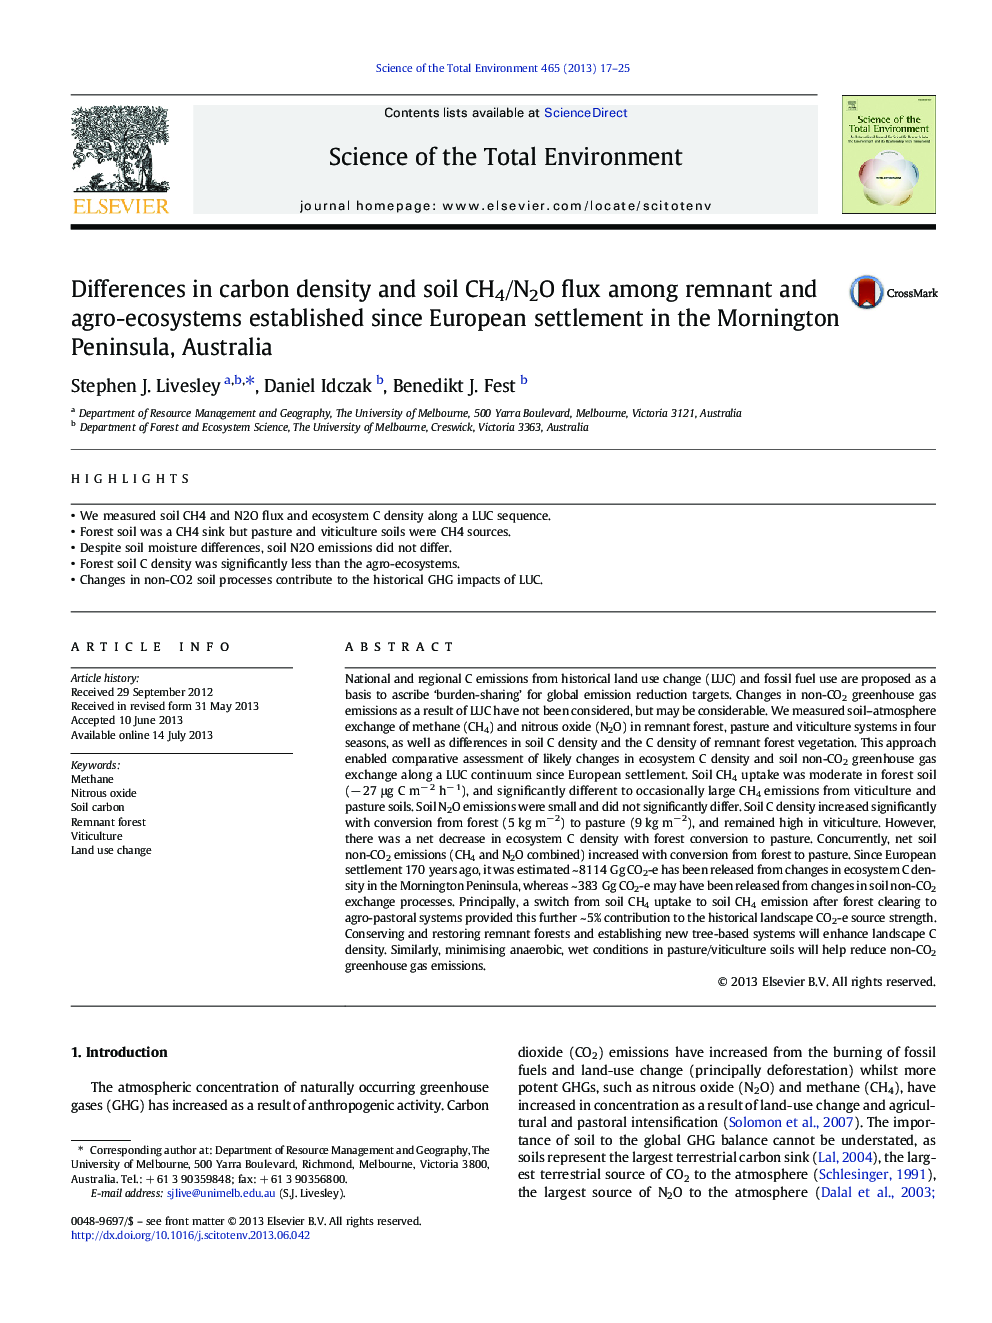 Differences in carbon density and soil CH4/N2O flux among remnant and agro-ecosystems established since European settlement in the Mornington Peninsula, Australia